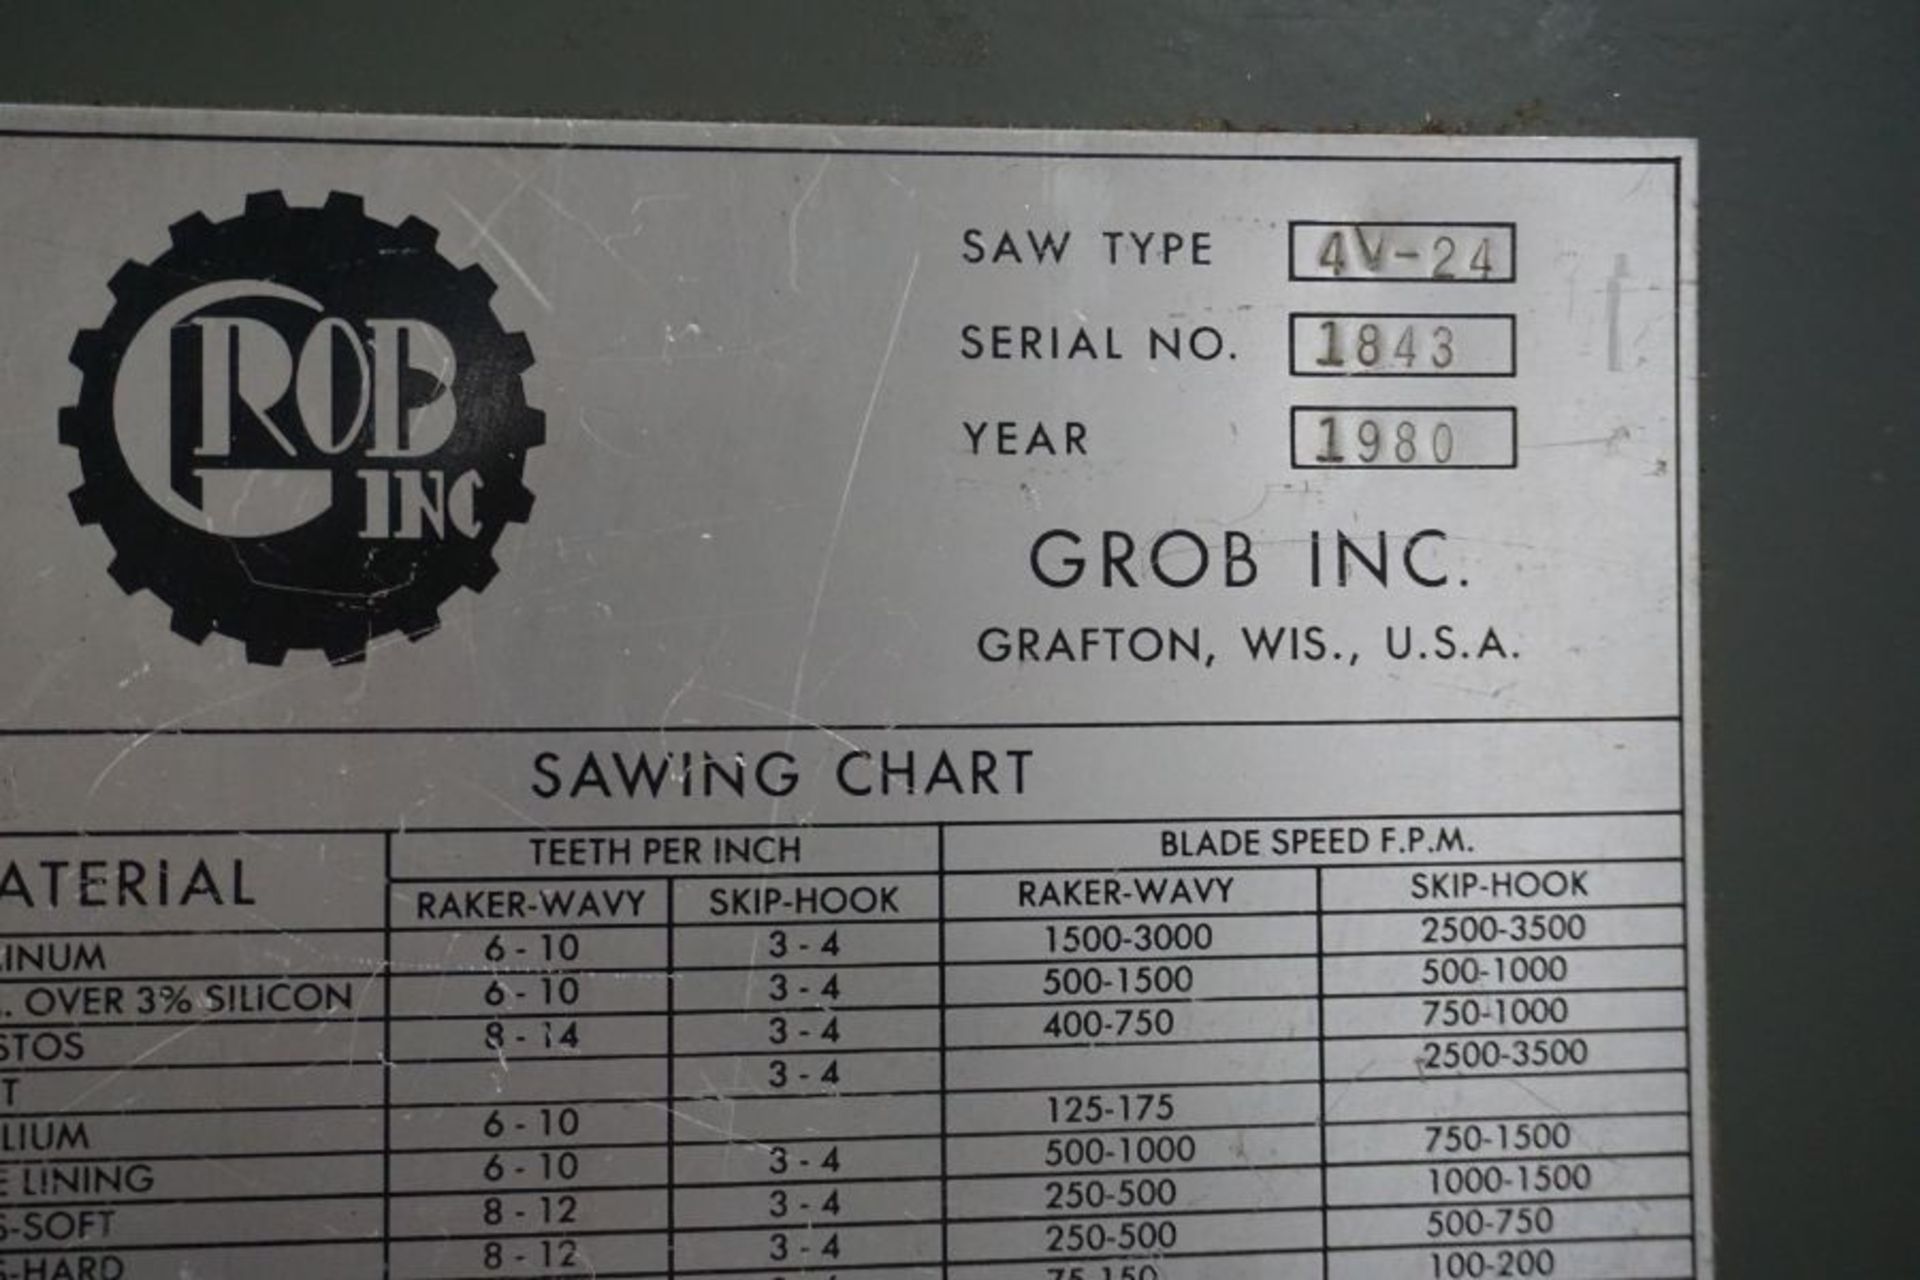 Grob 4V-24 Vertical Band Saw, s/n 1843, New 1980 - Image 5 of 5